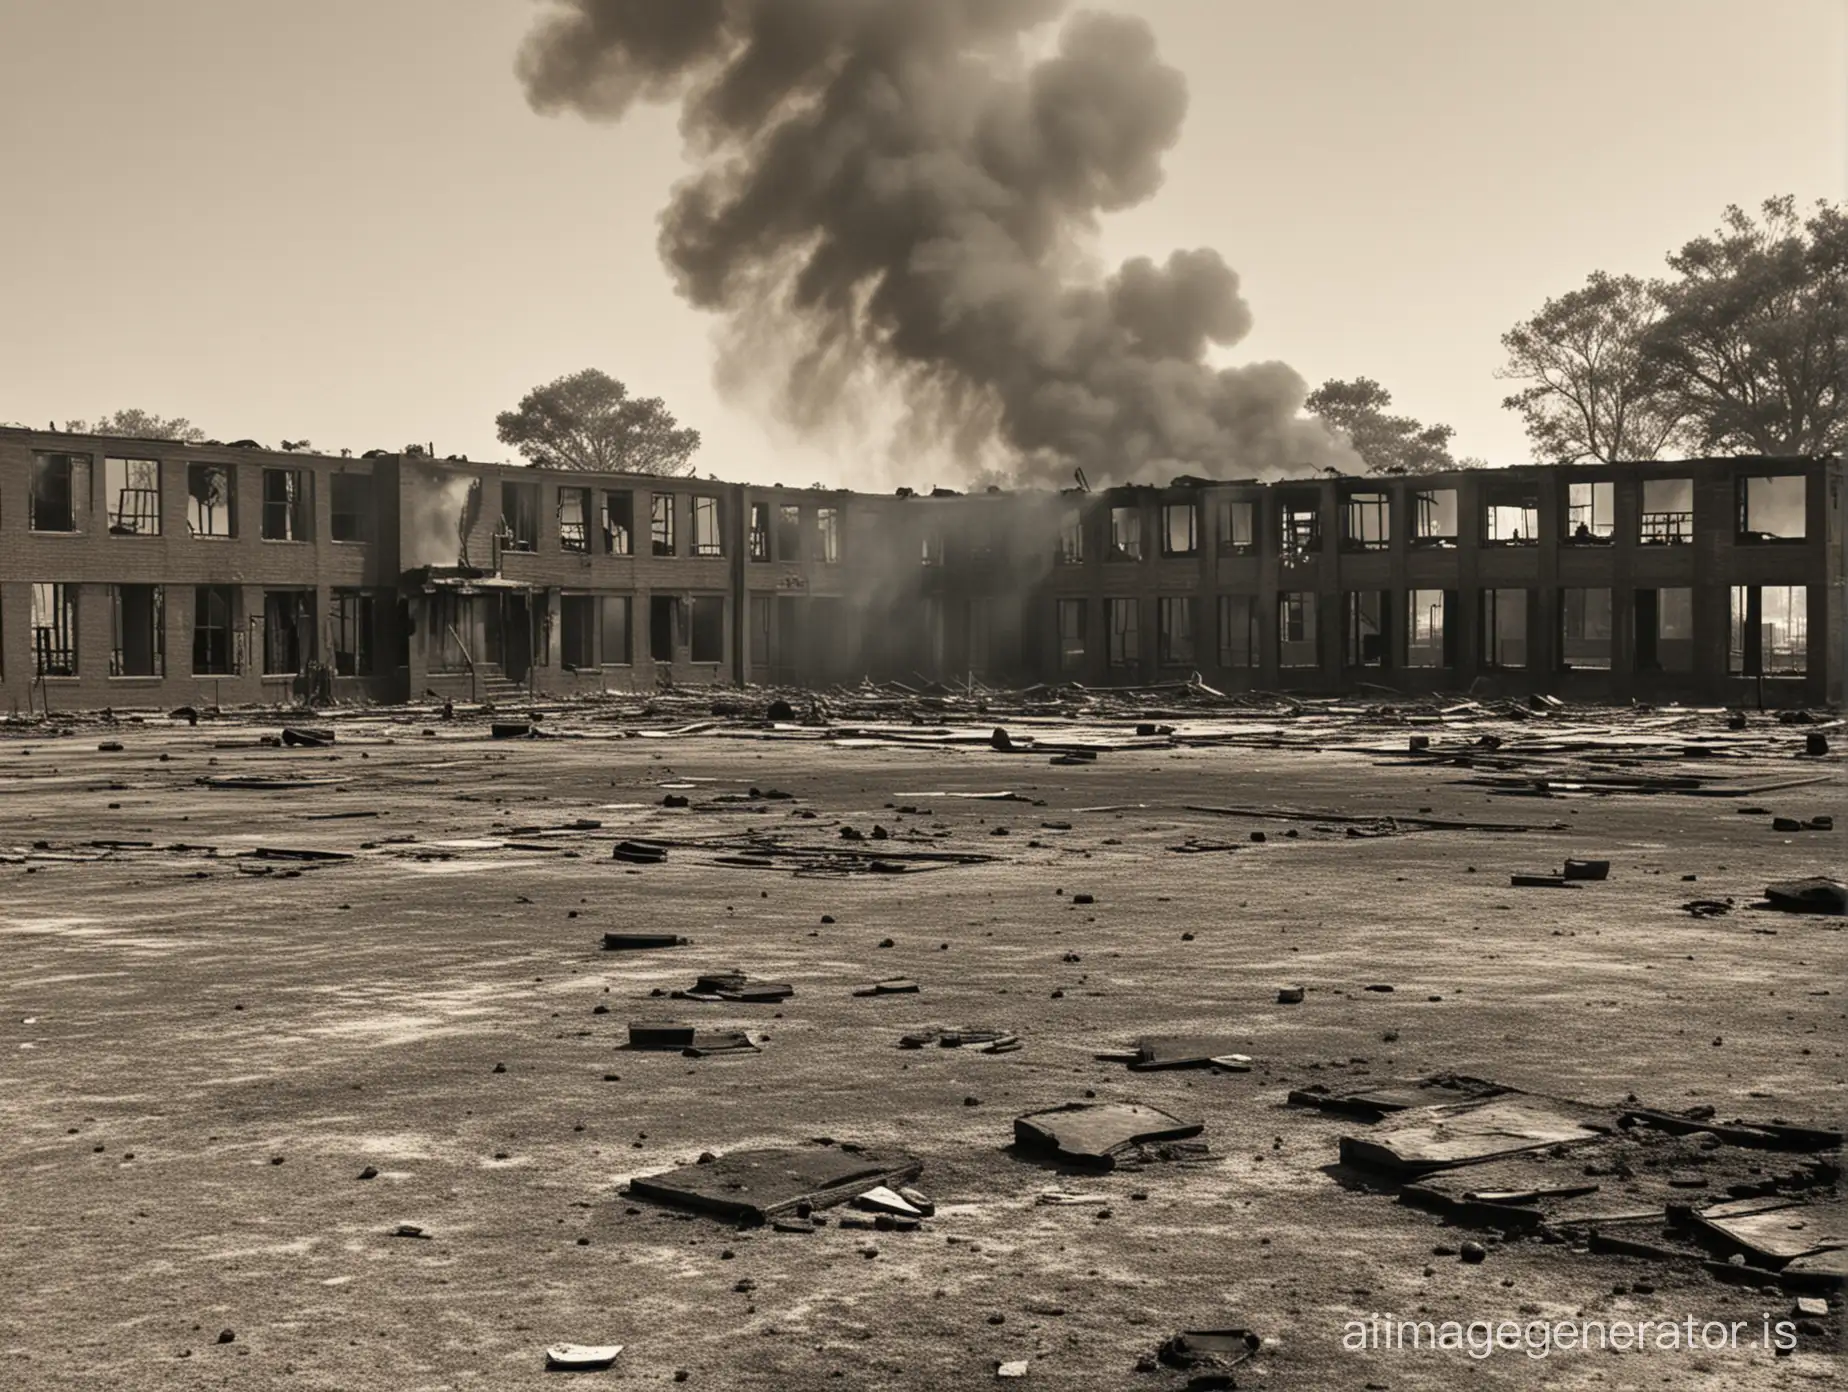 Scorched school